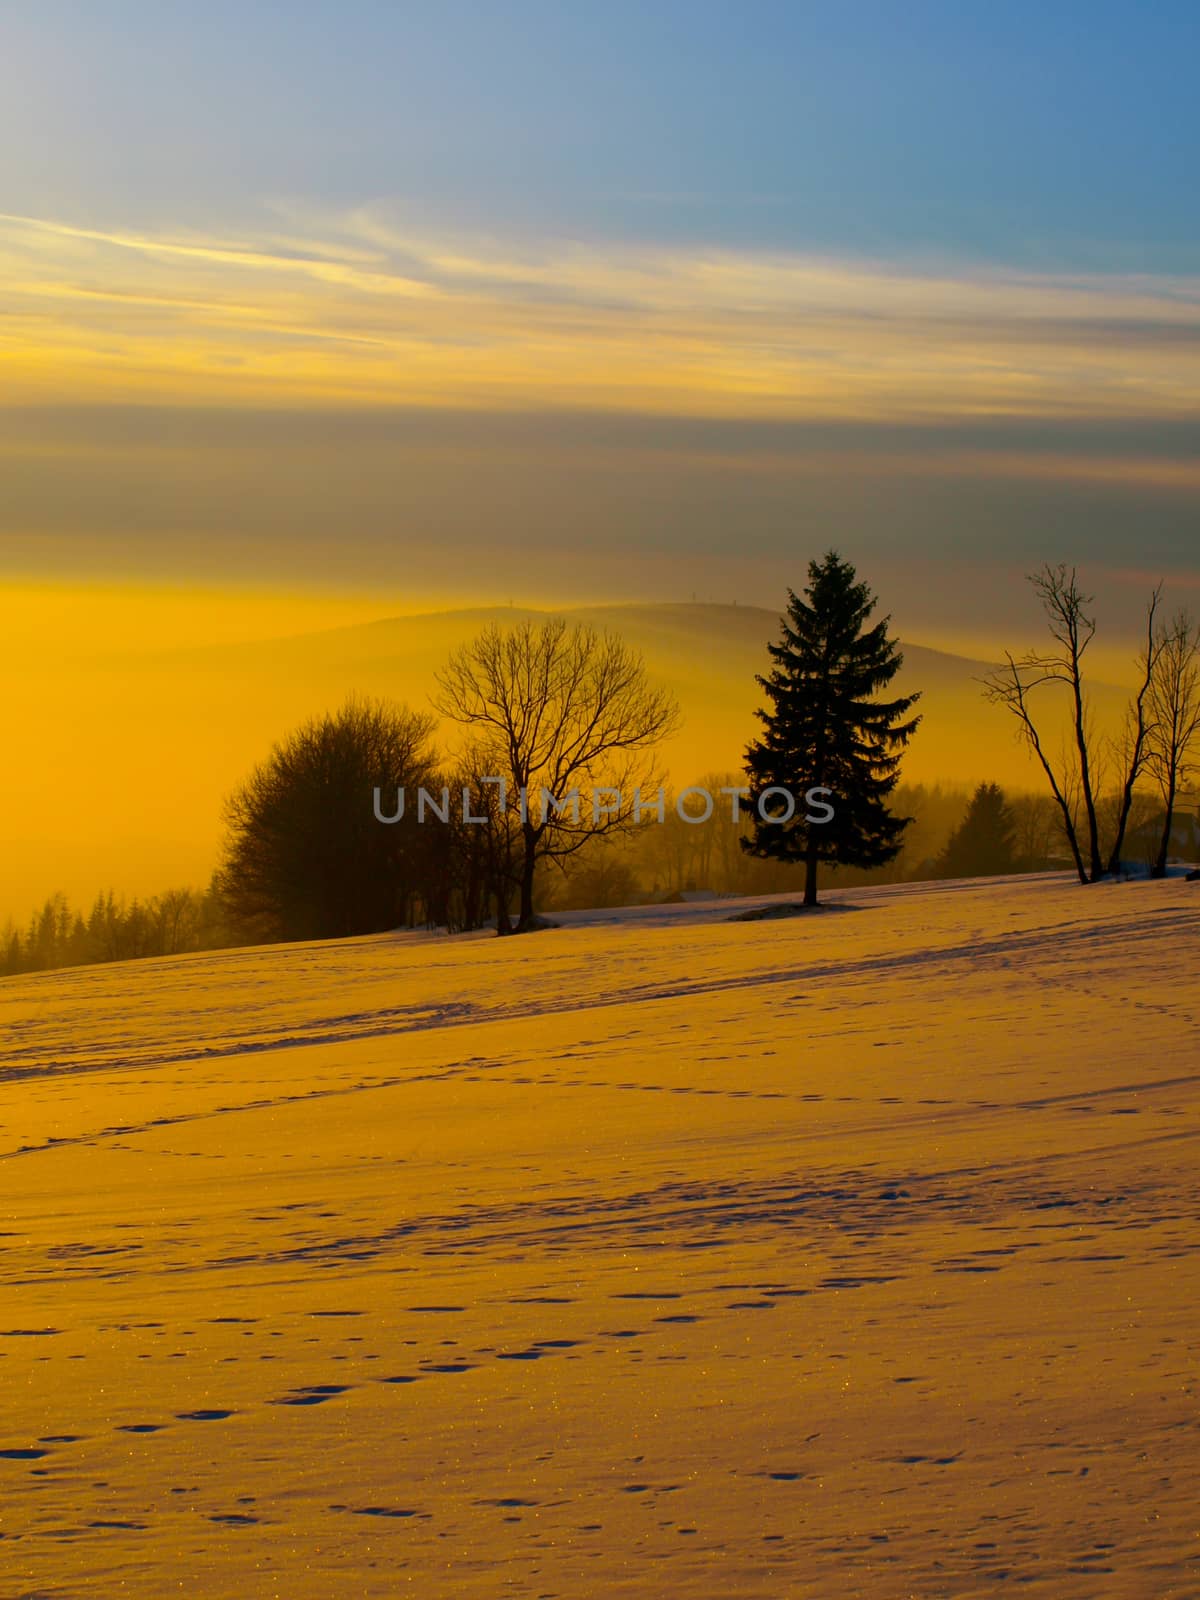 Wintertime sunset in landscape with trees, warm colors